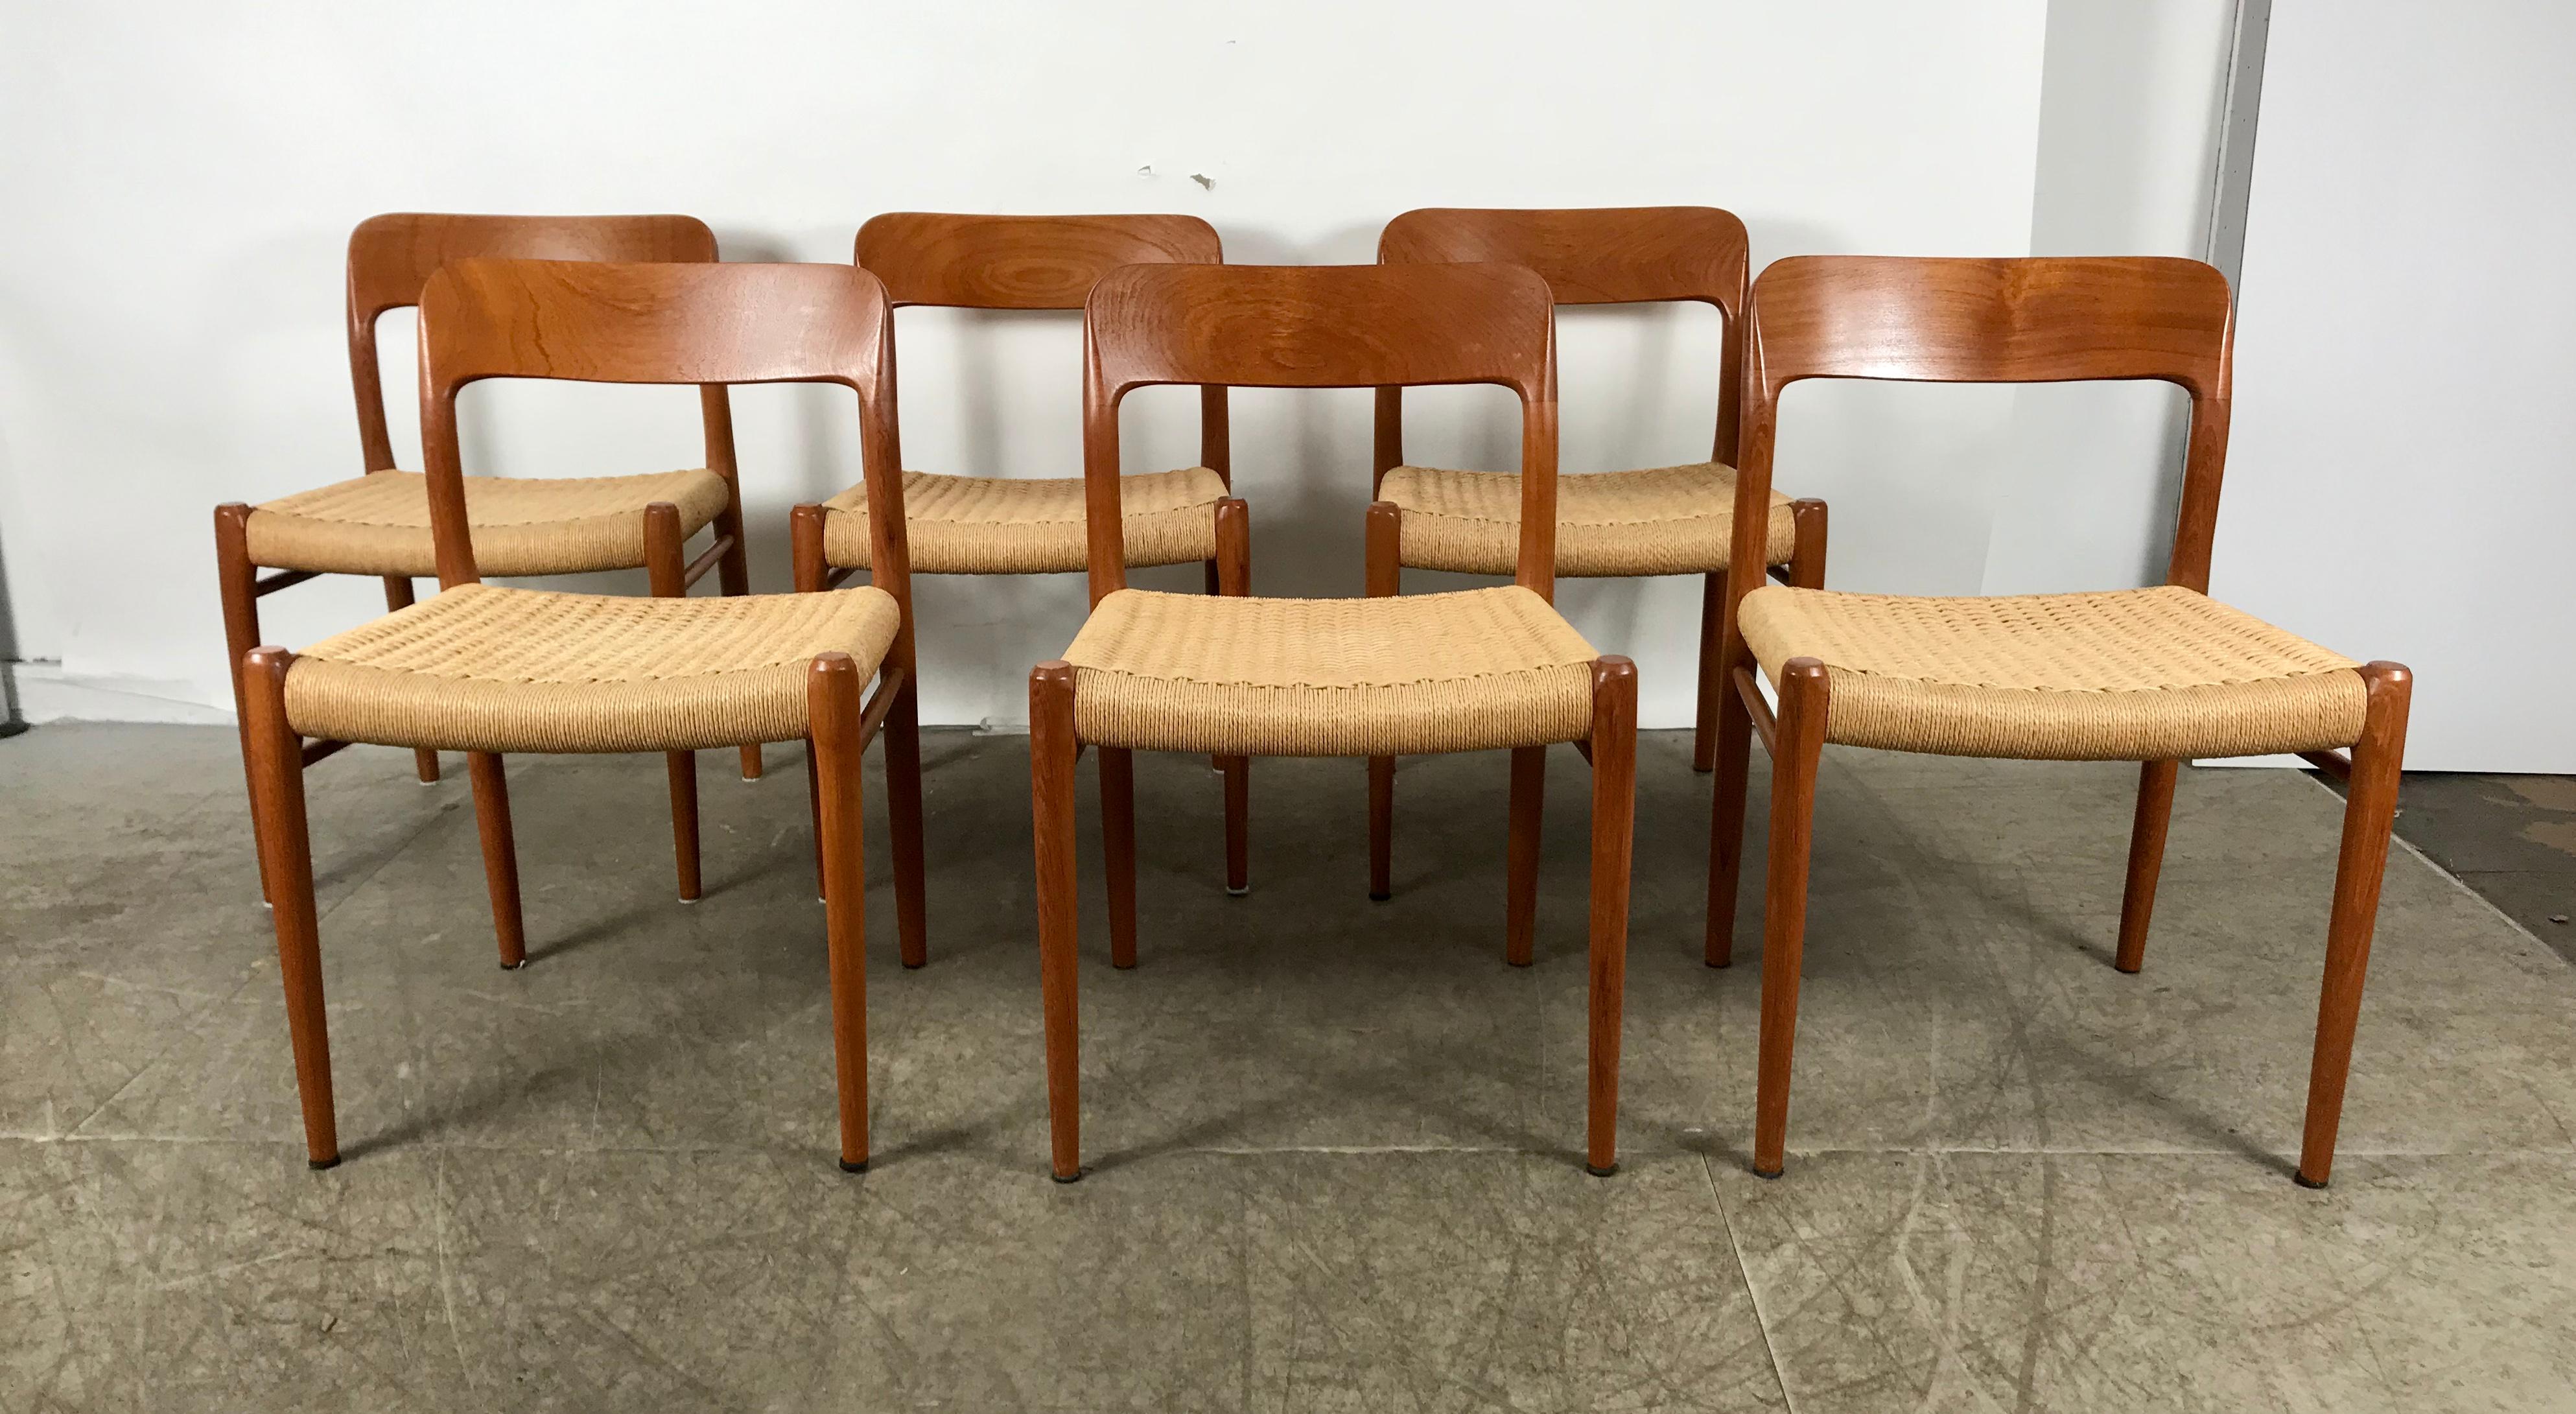 Classic set 6 teak and cane dining chairs ,Niels Moller model 75, Denmark, stunning set, amazing original condition, Warm grained teak wood finish, caning in excellent condition, extremely comfortable, All chairs ink stamped J L MOLLER made in